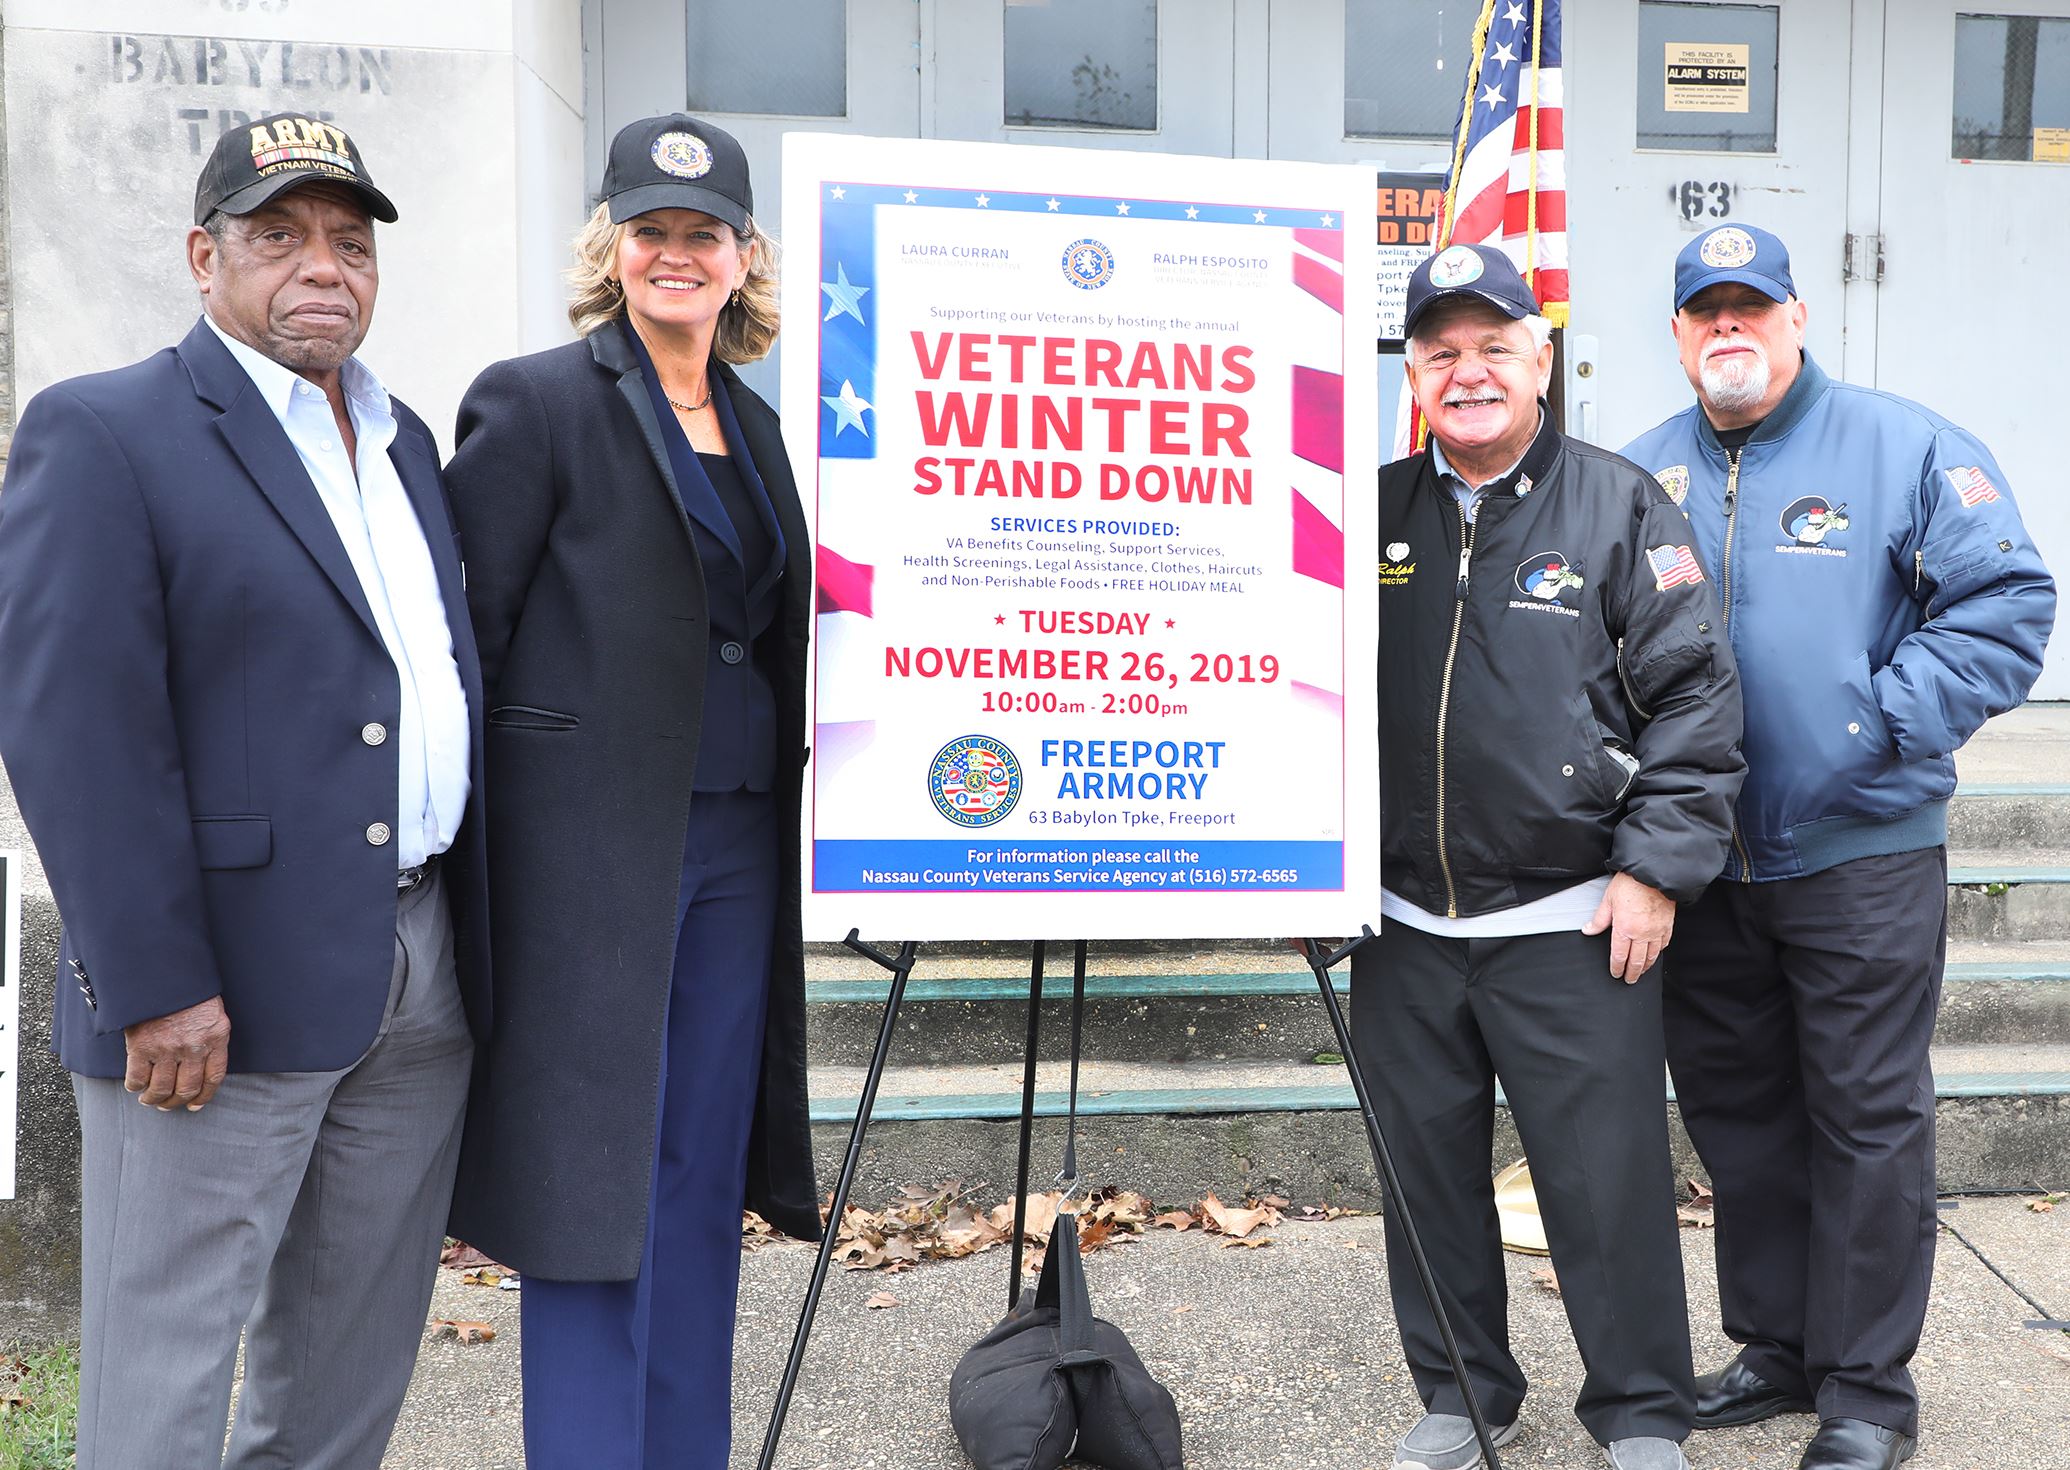 Ahead of Veterans Day Curran asks Veterans to Check in with County